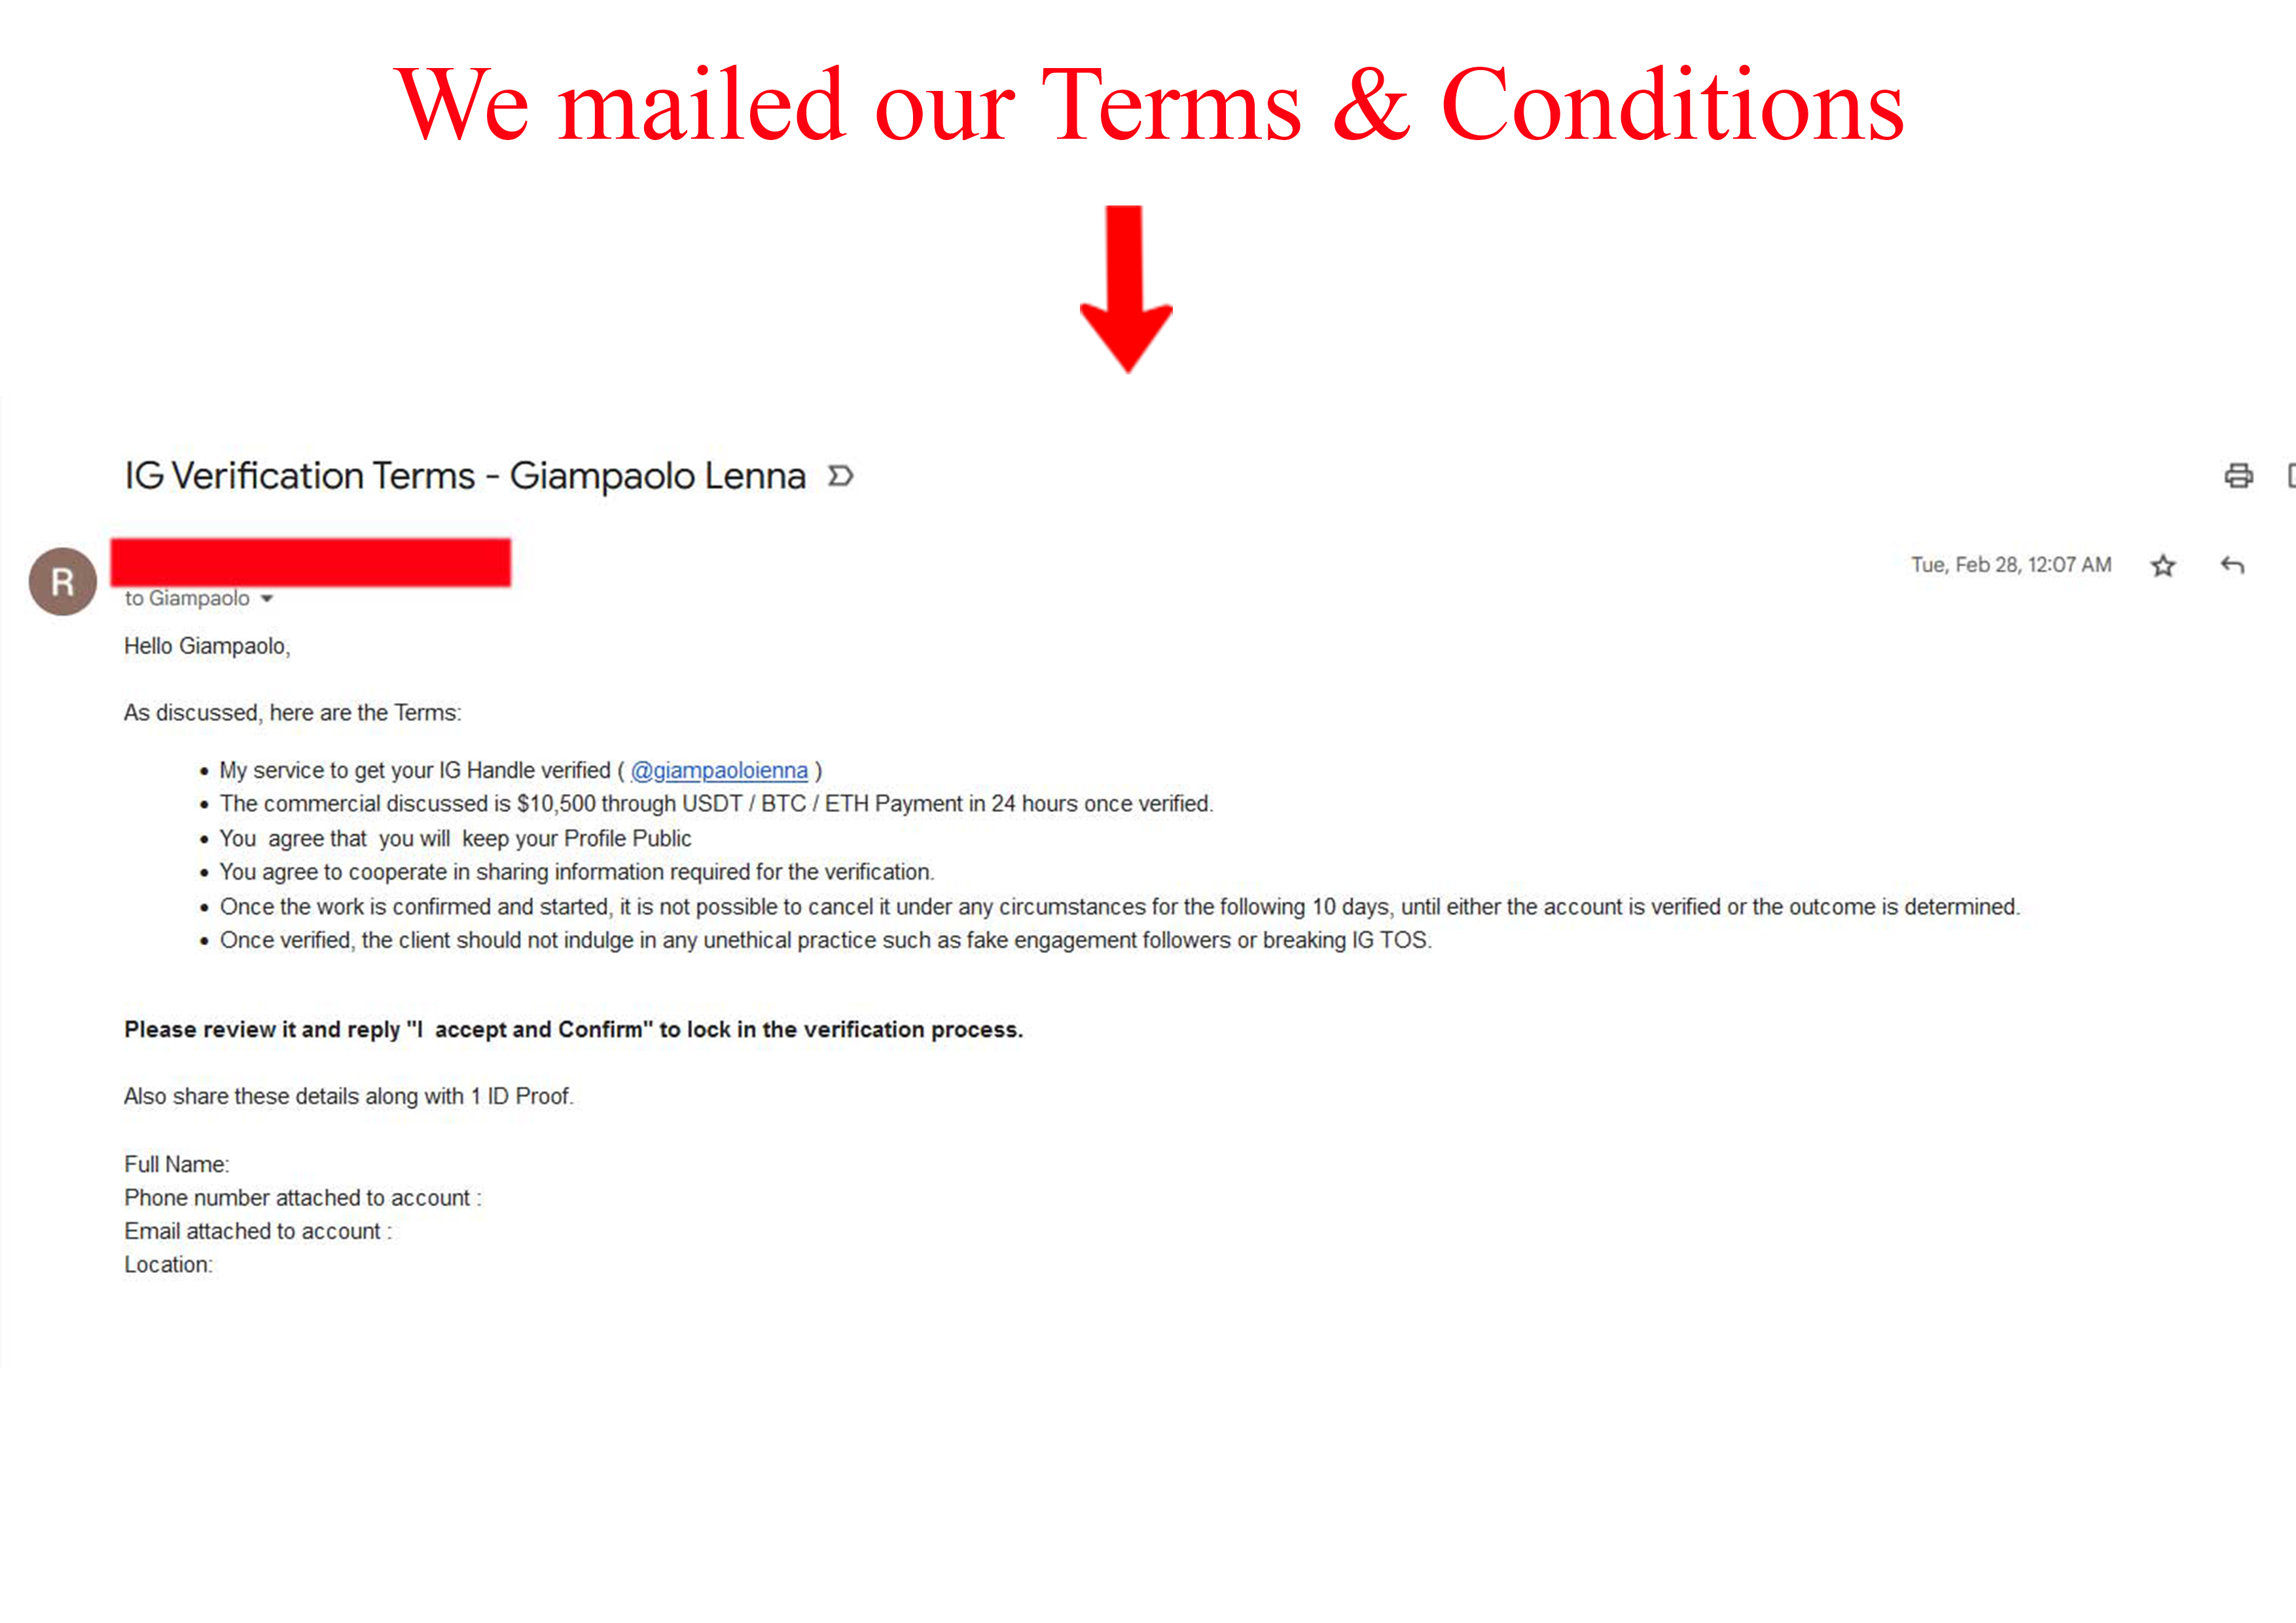 Our Service Terms and Conditions